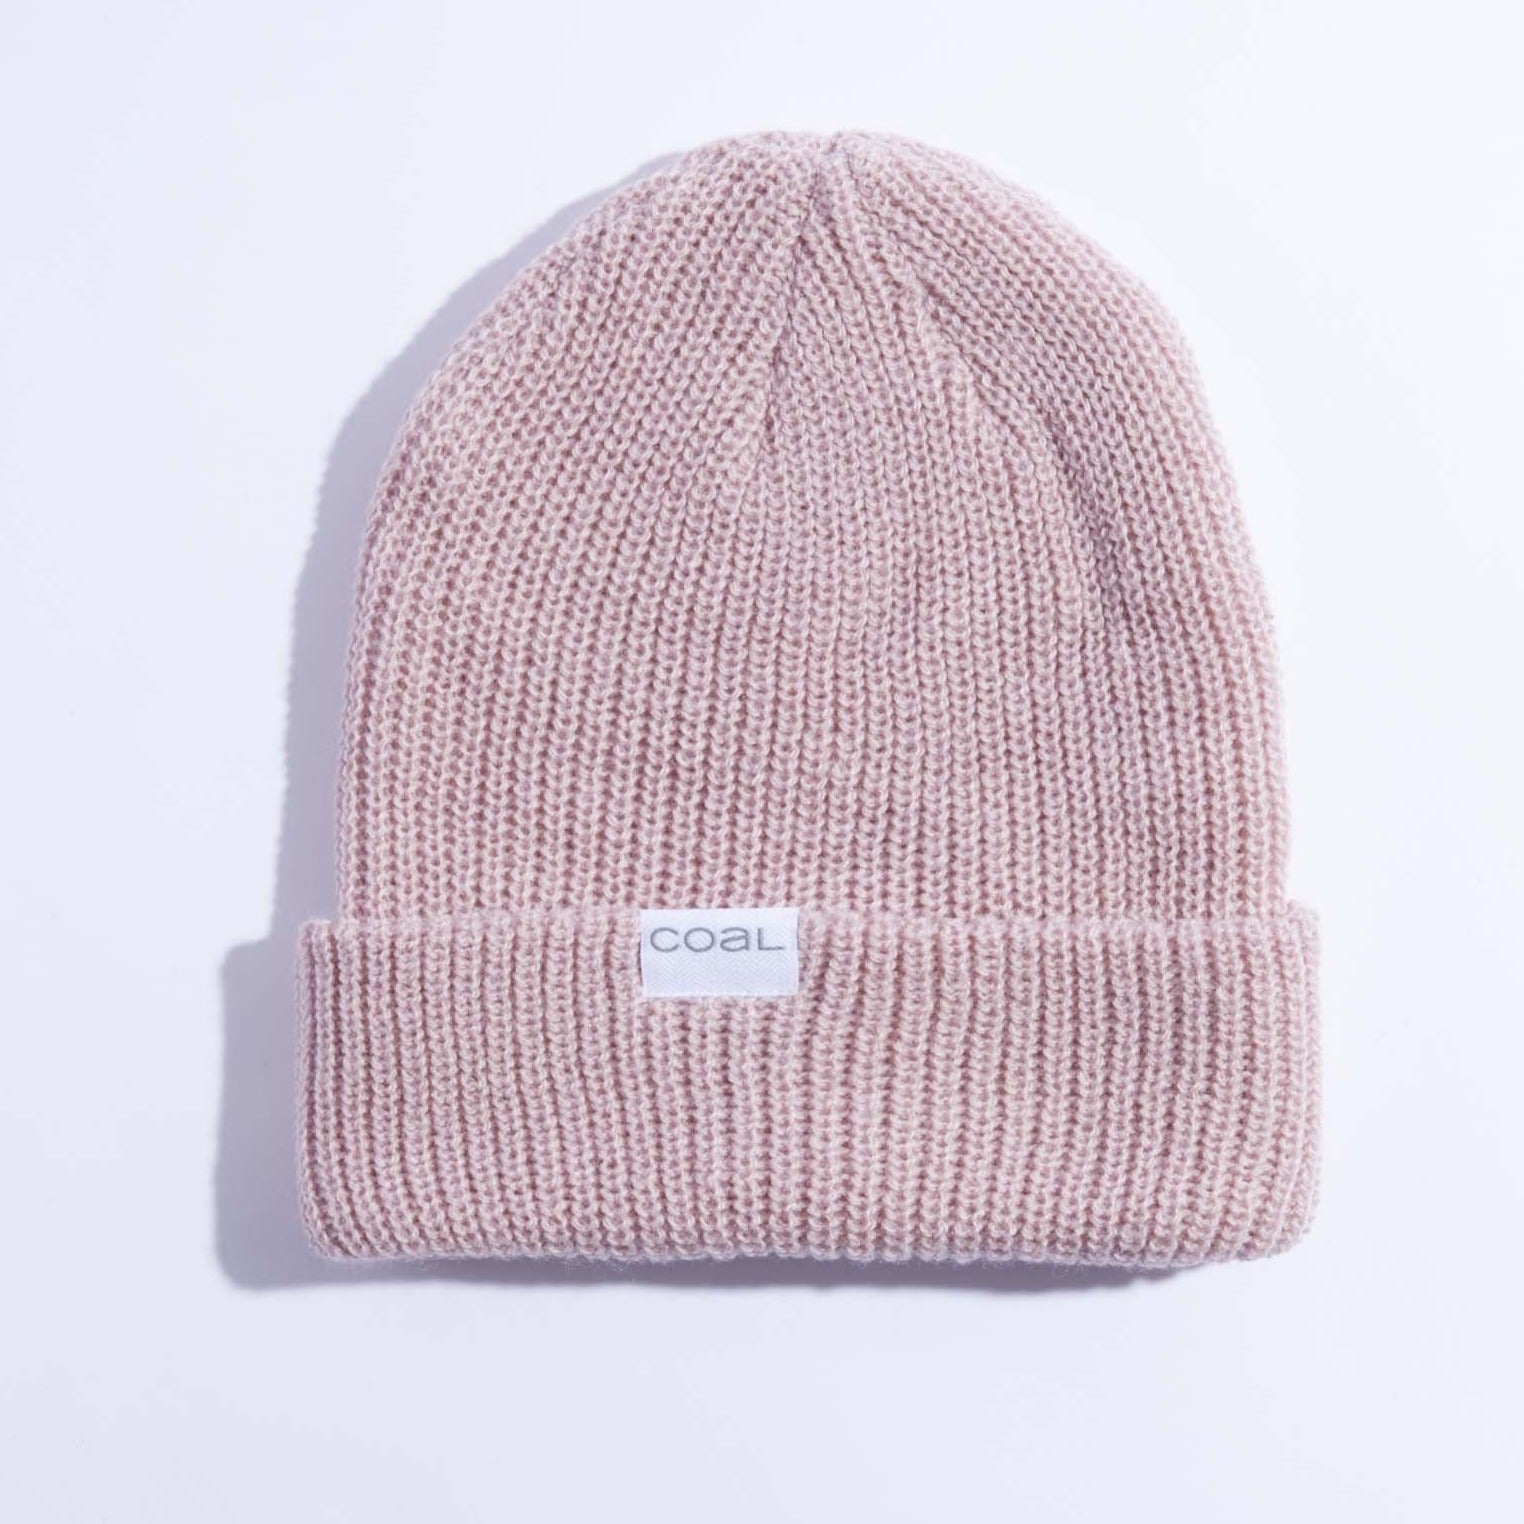 Dusty Rose The Stanley Soft Cuff Coal Beanie